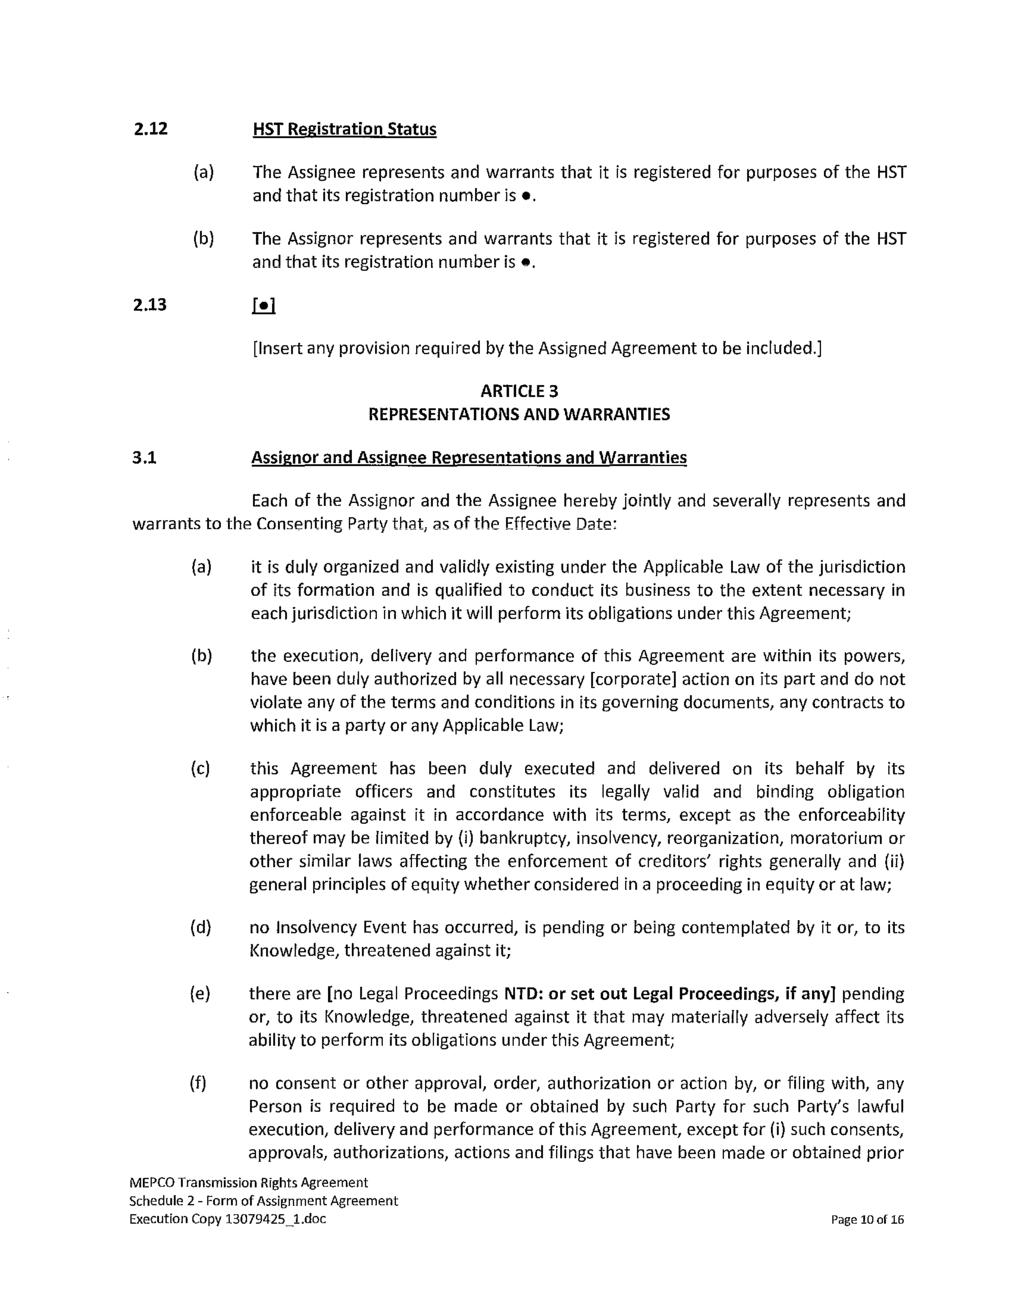 Maritime Link Appendix 2.08 Page 71 of 108 2.12 HST Registration Status a) b) The Assignee represents and warrants that it is registered for purposes of the HST and that its registration number is.